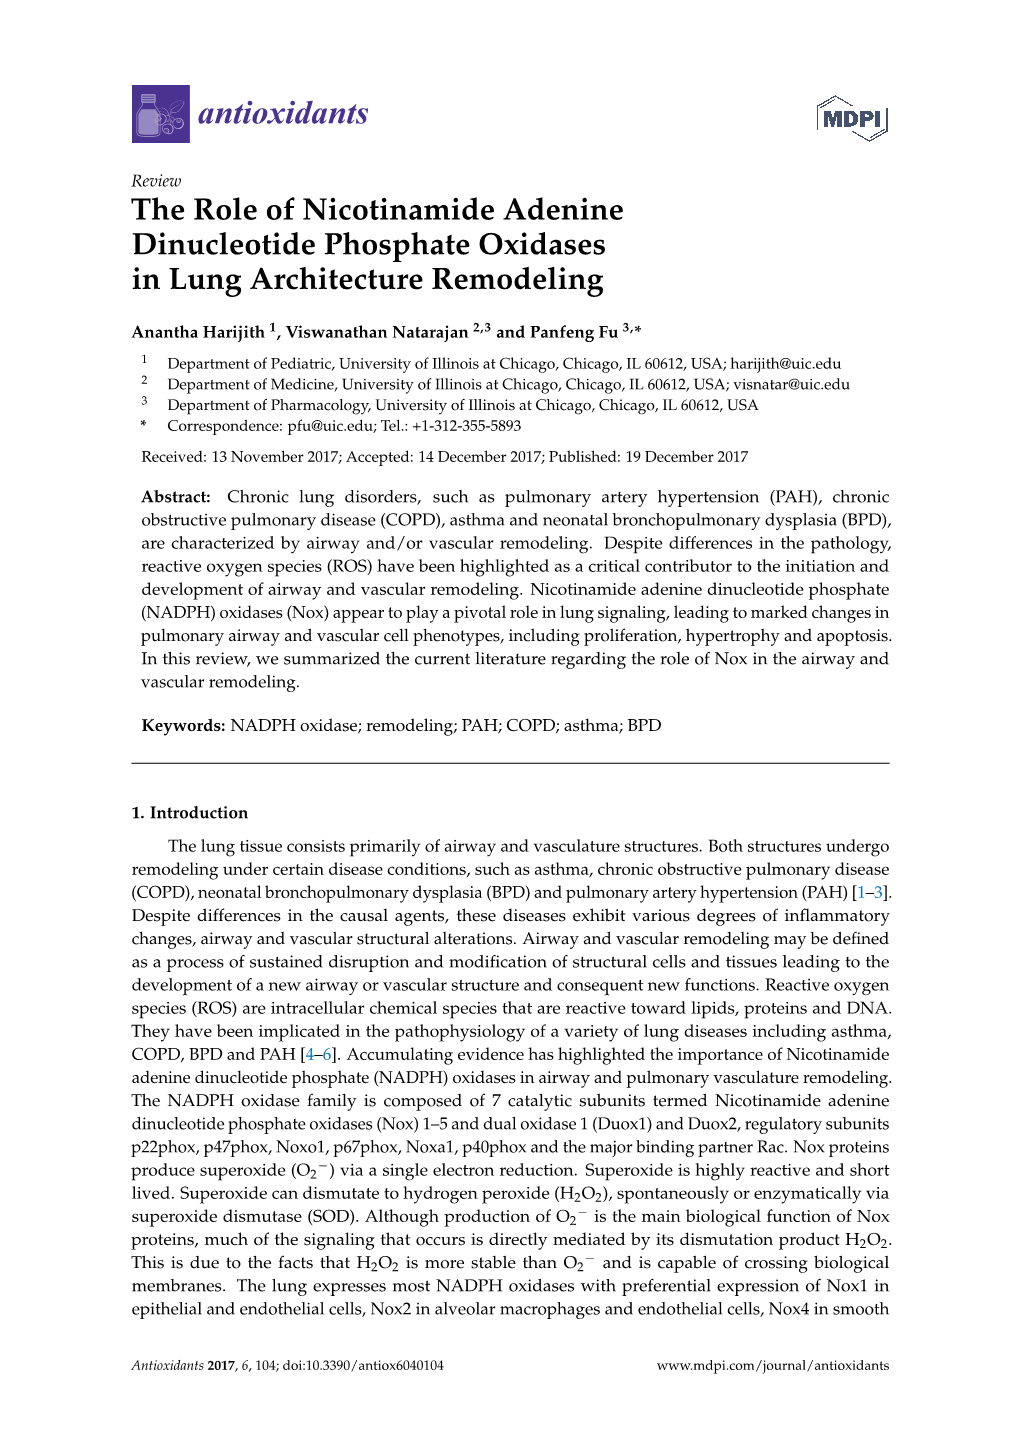 The Role of Nicotinamide Adenine Dinucleotide Phosphate Oxidases in Lung Architecture Remodeling